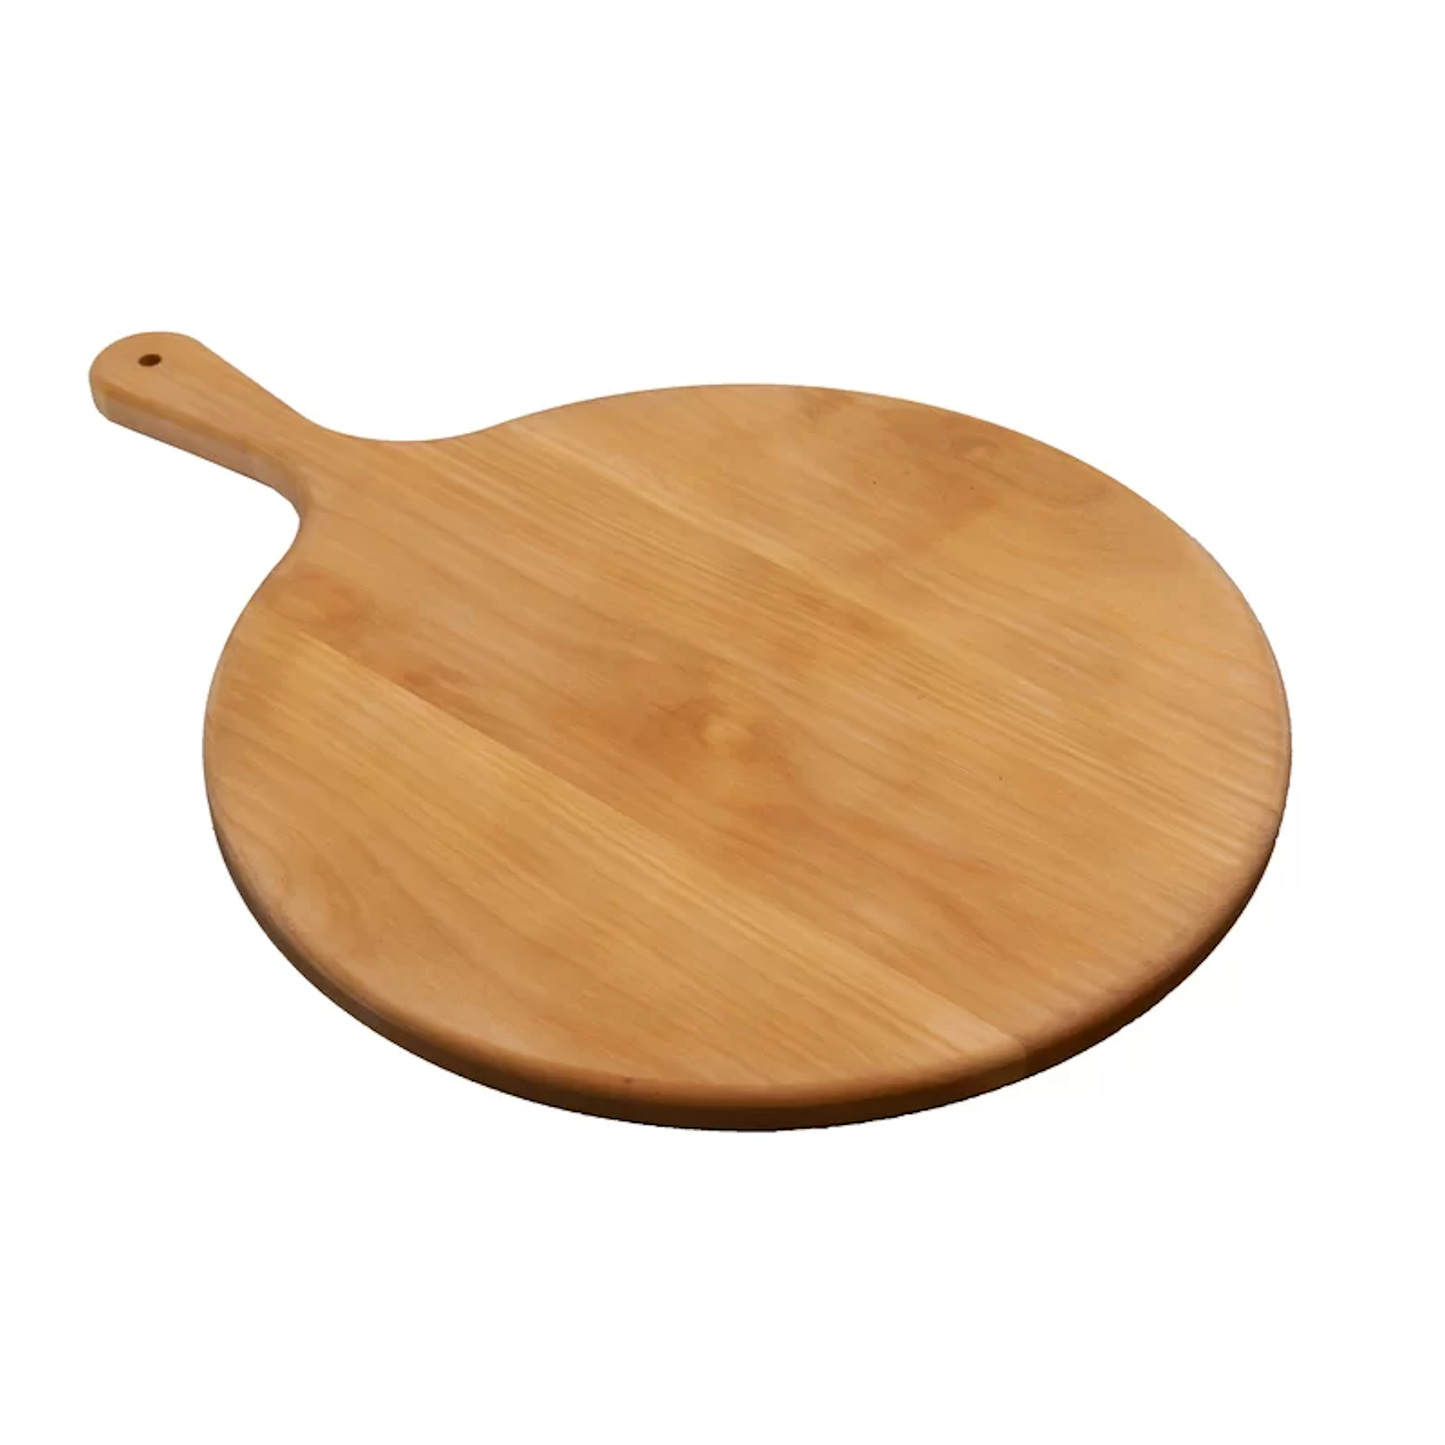 Handmade Hardwood Round Paddle Board, pizza board, serving tray